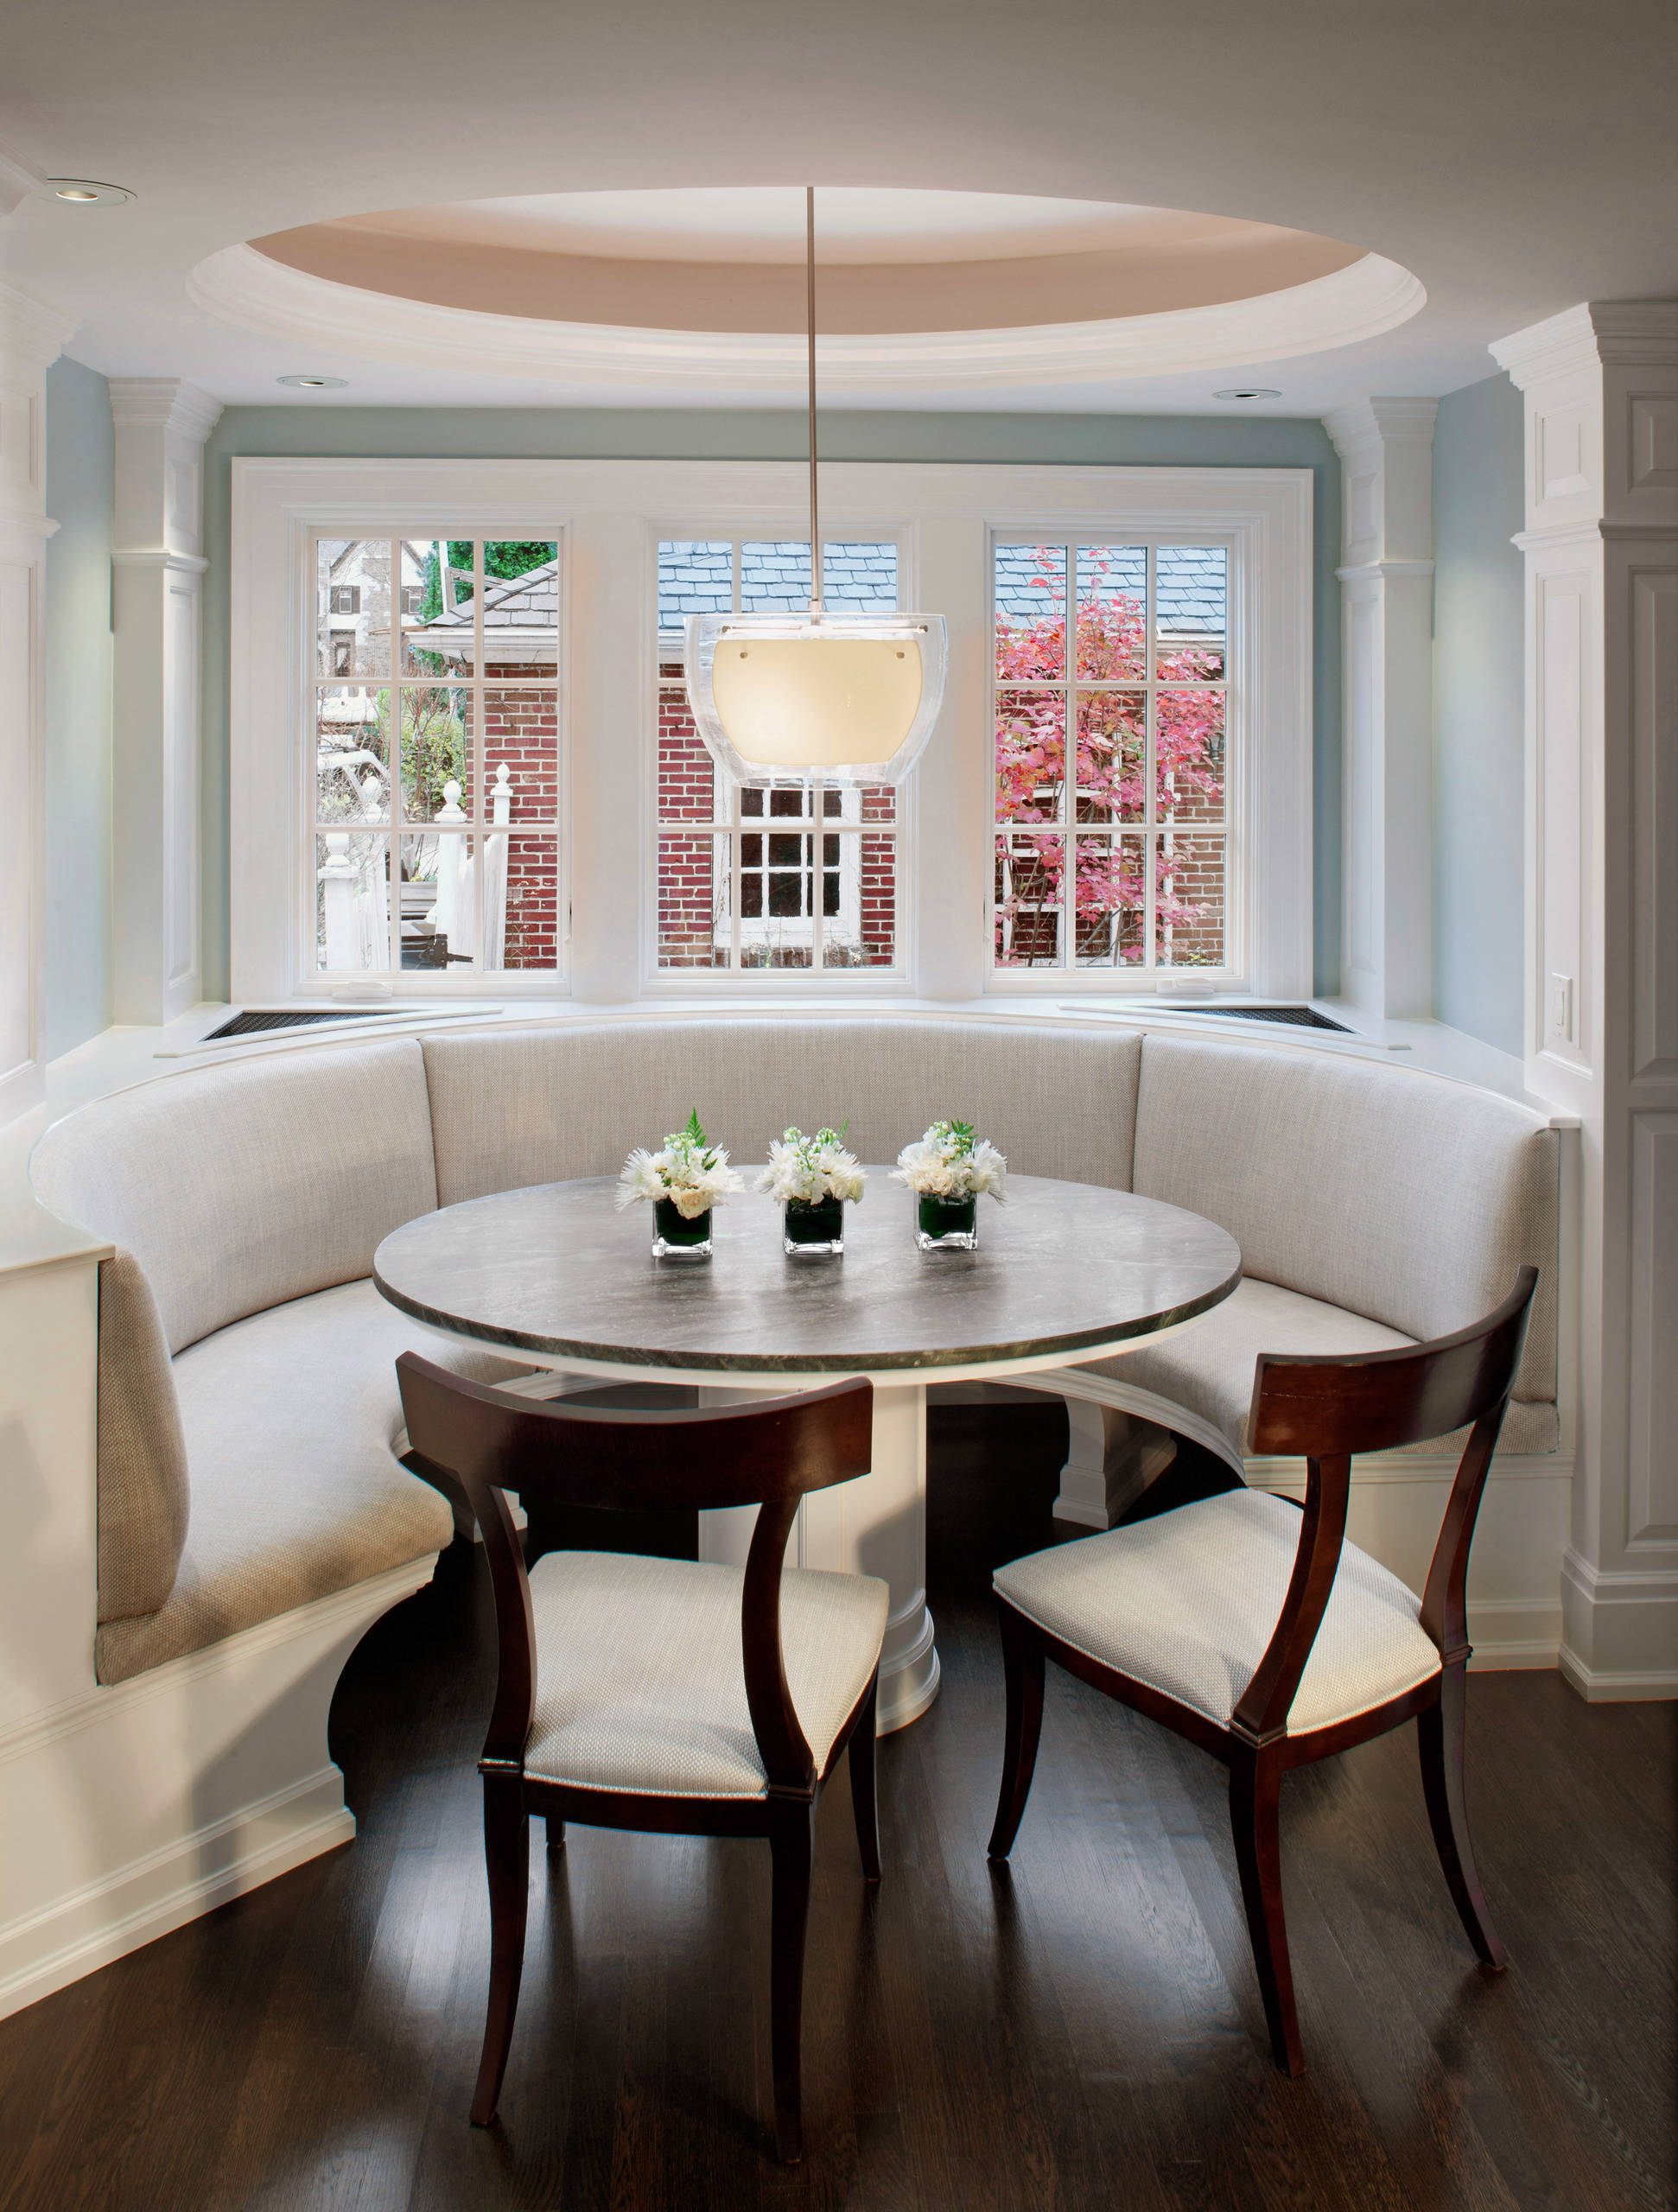 Curved Banquette Seat - Photos & Ideas | Houzz